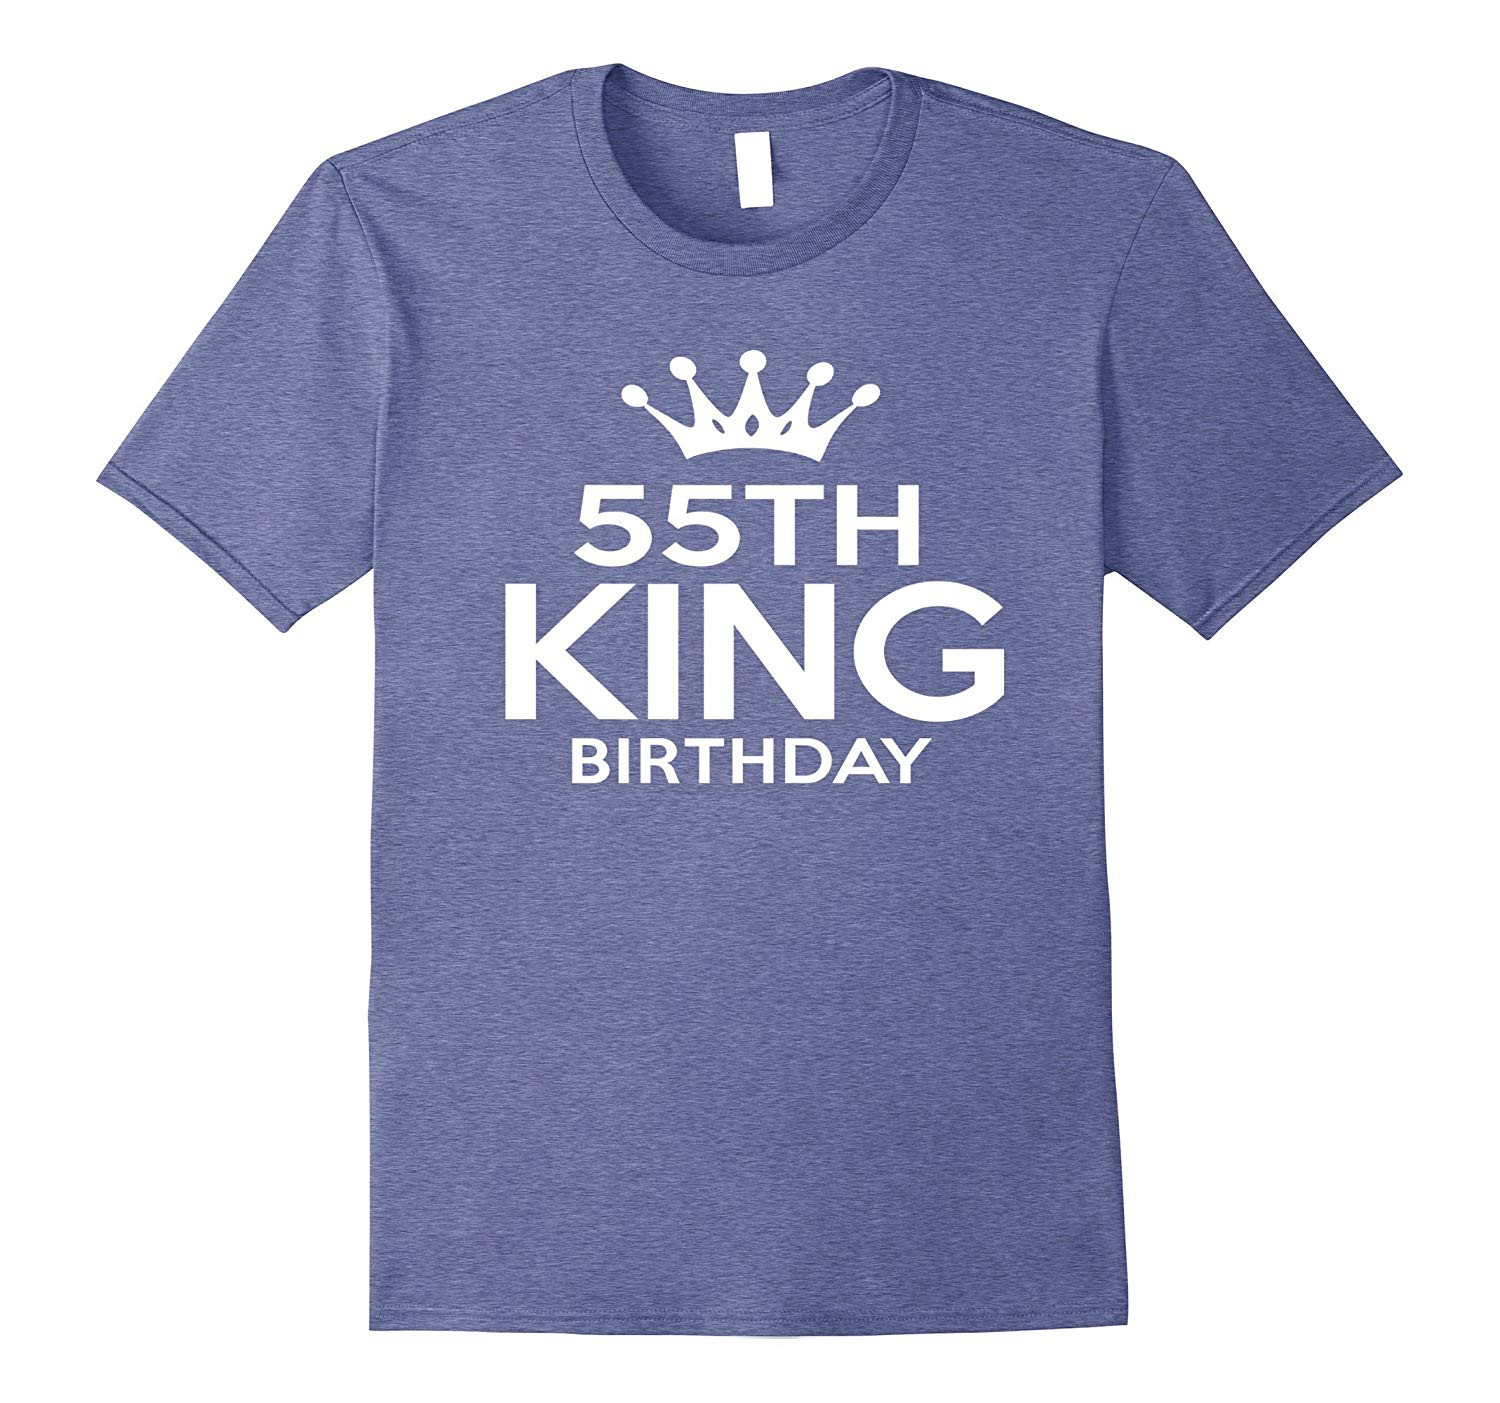 55Th Birthday Gift Ideas
 55th King 55 Year Old 55th Birthday Gift Ideas for him